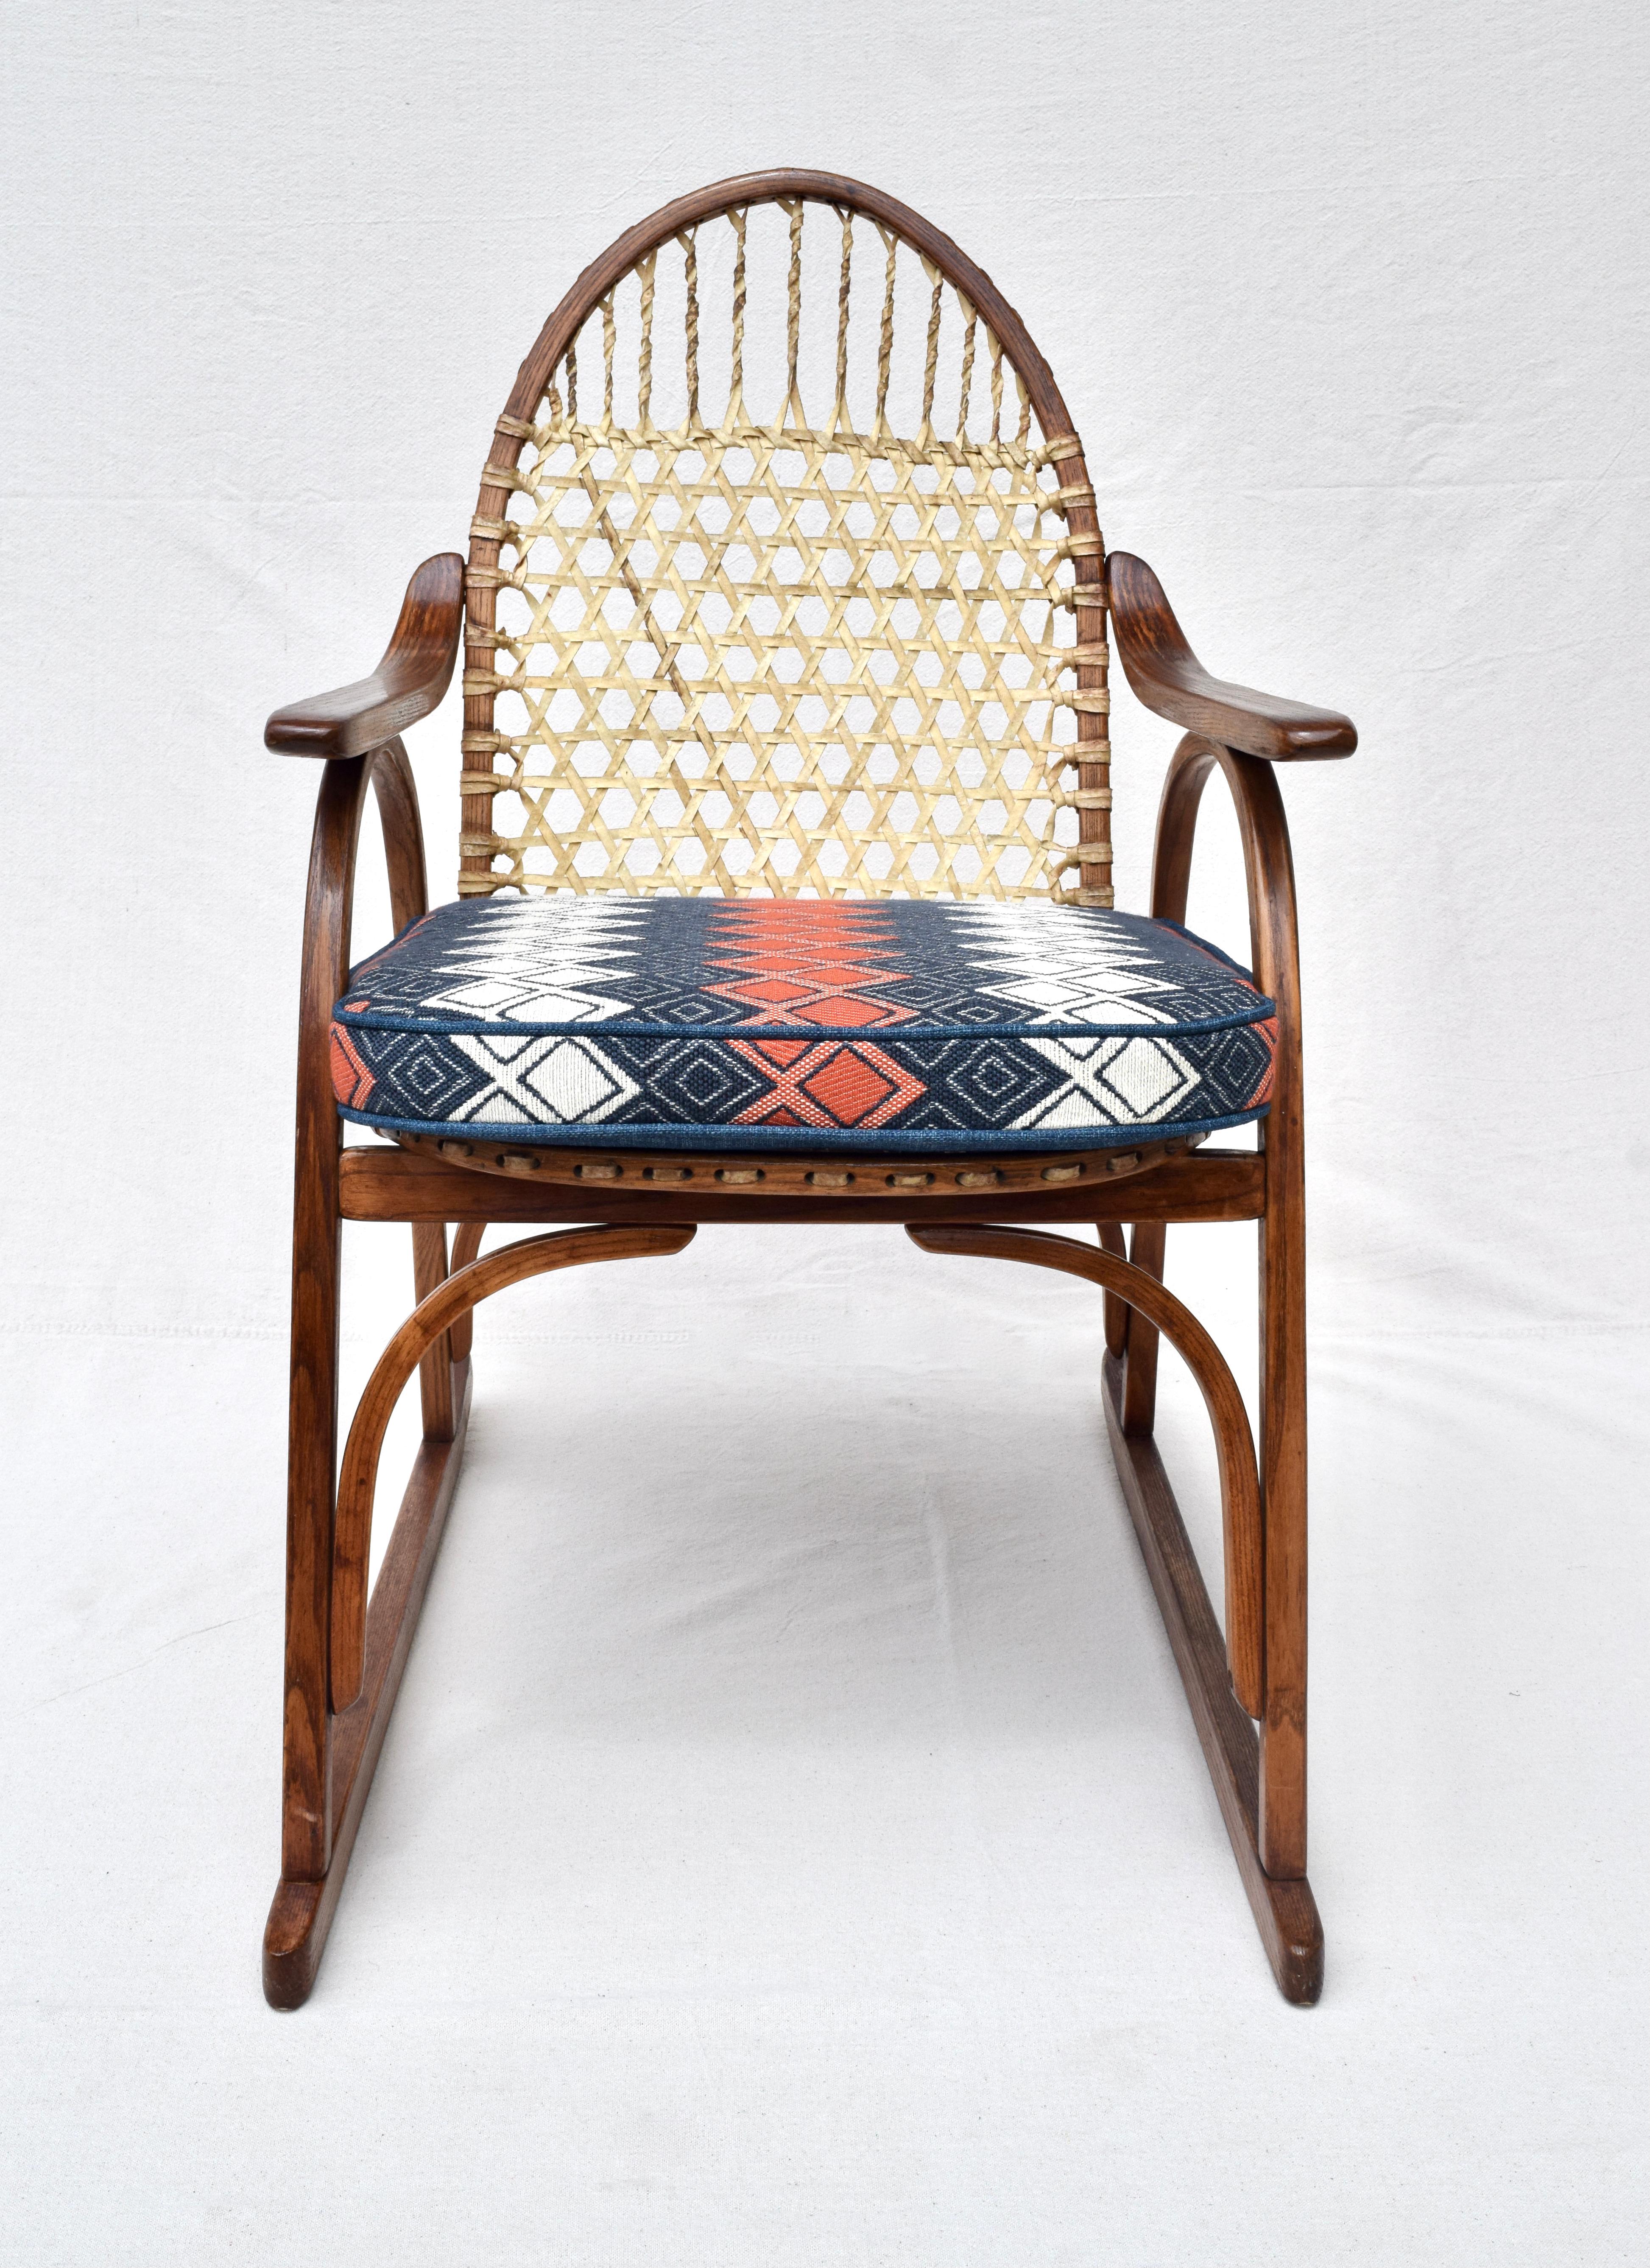 Scarcely seen Adirondack style Vermont Tubbs Snow Shoe chair with new custom cushion upholstered in Robert Allen Designs Zircon Cayenne textured fabric. Fully hand detailed original finish & strung rawhide.